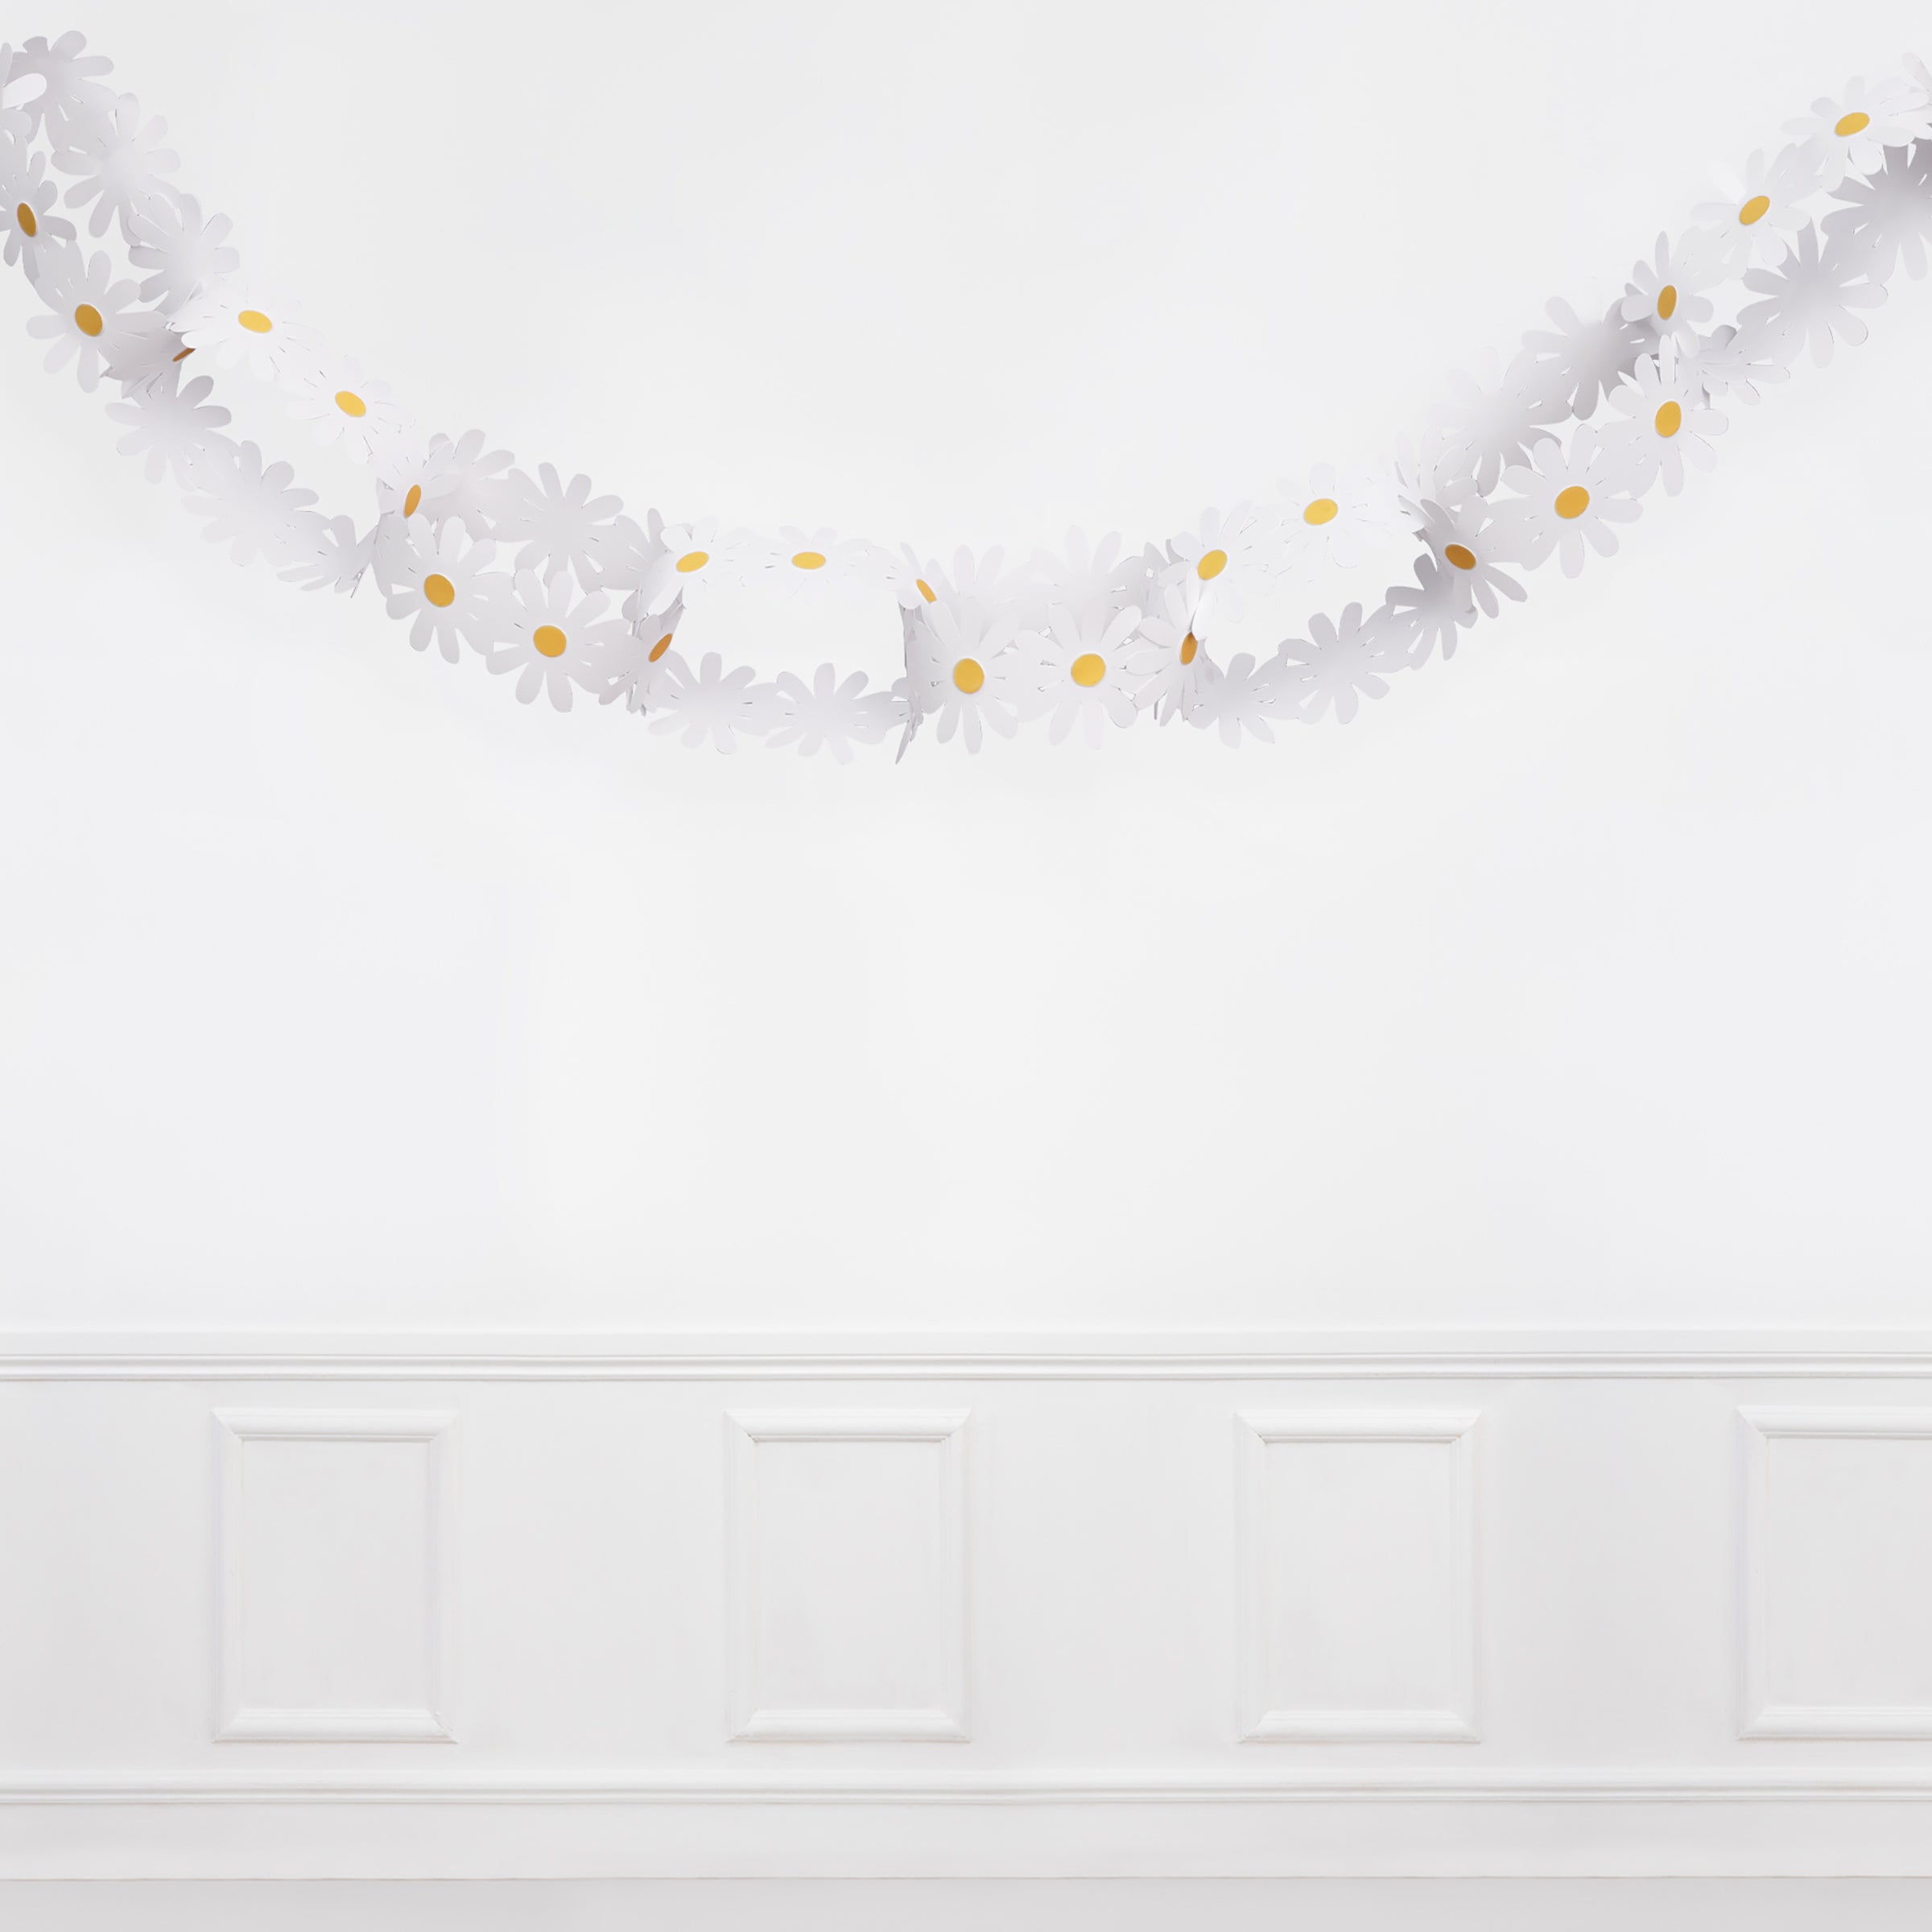 Our gorgeous paper daisy chains are easy to assemble and look striking.